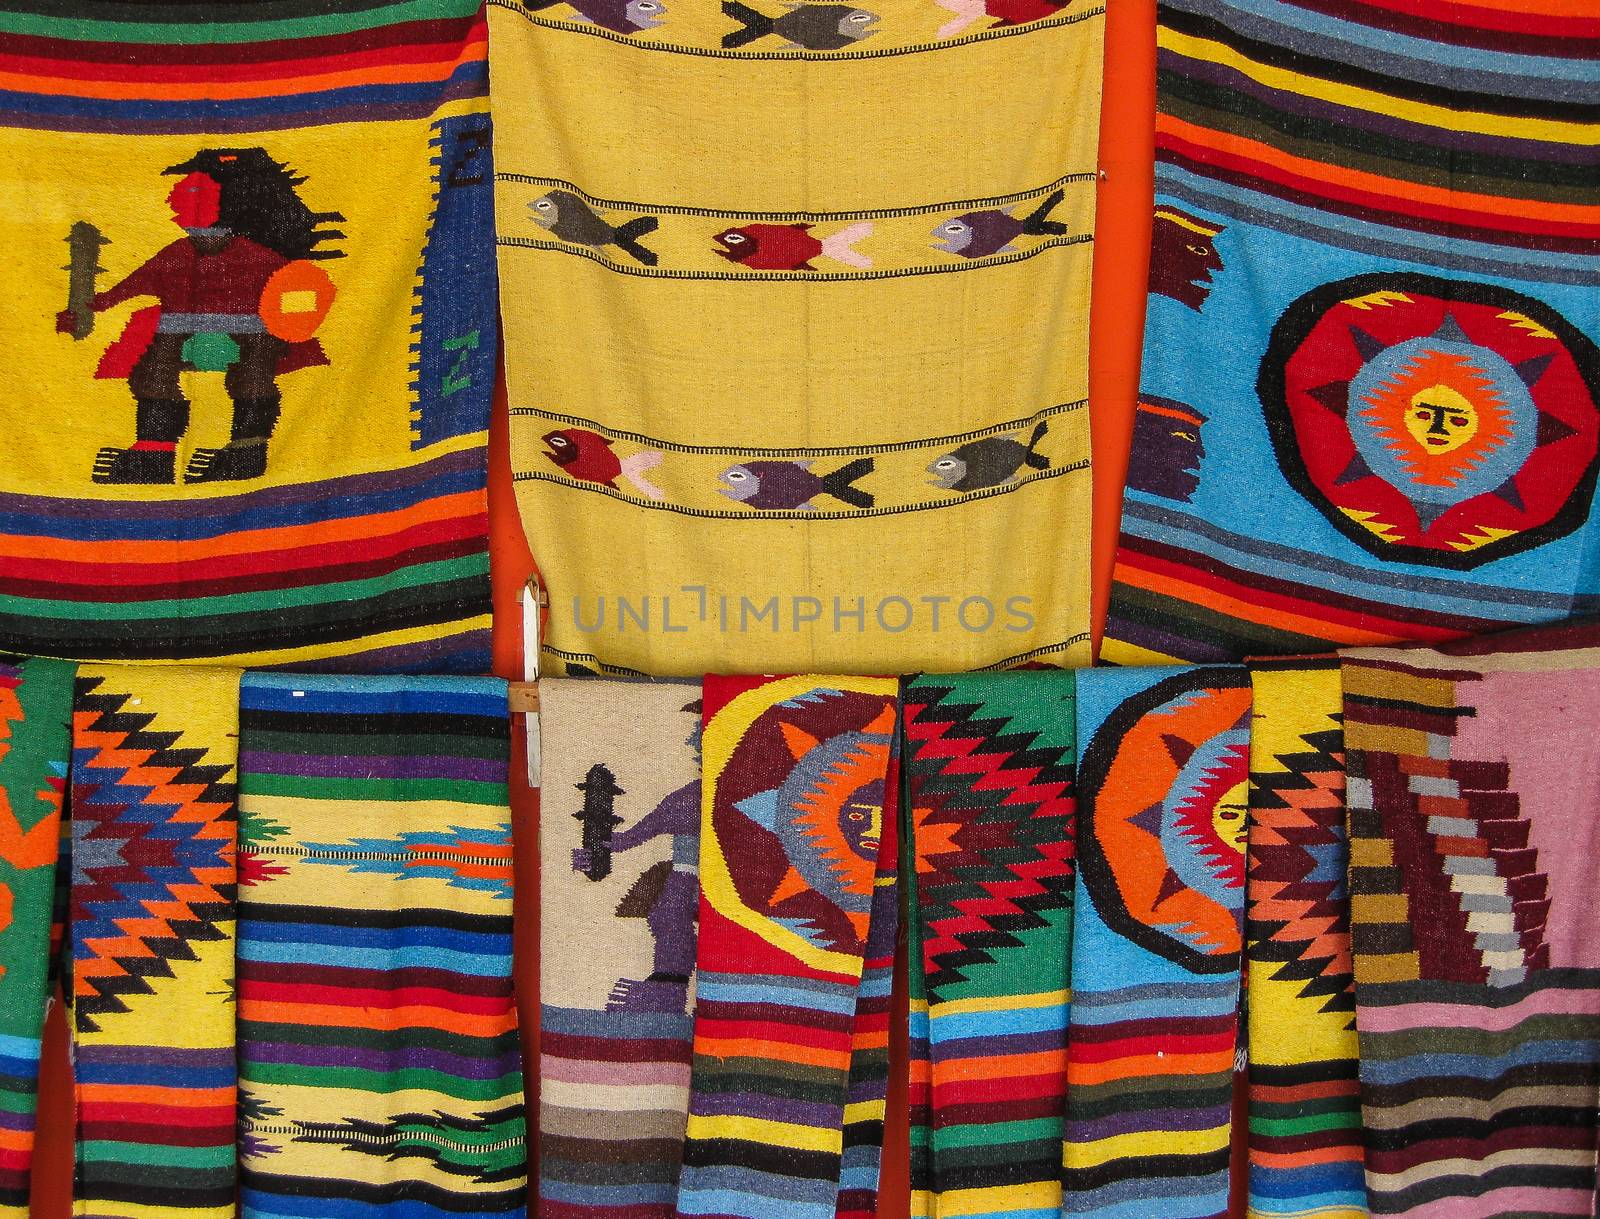 Mexican wool blankets with colorful designs and patterns for sale in the market in Yucatan, Mexico.